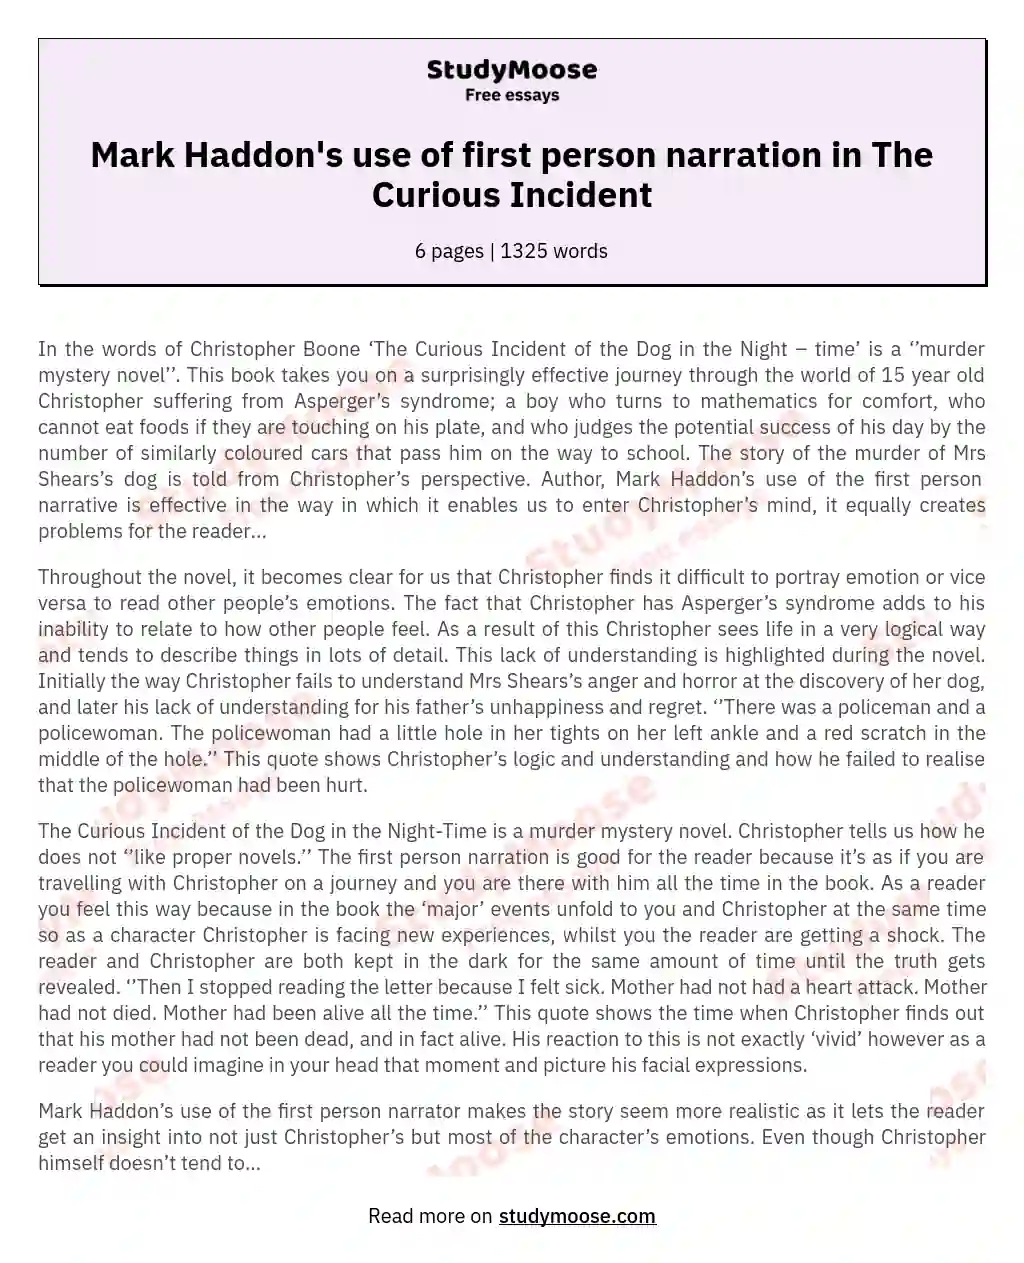 How does Mark Haddon use the first person narration in The Curious Incident of the Dog in the Night-Time?